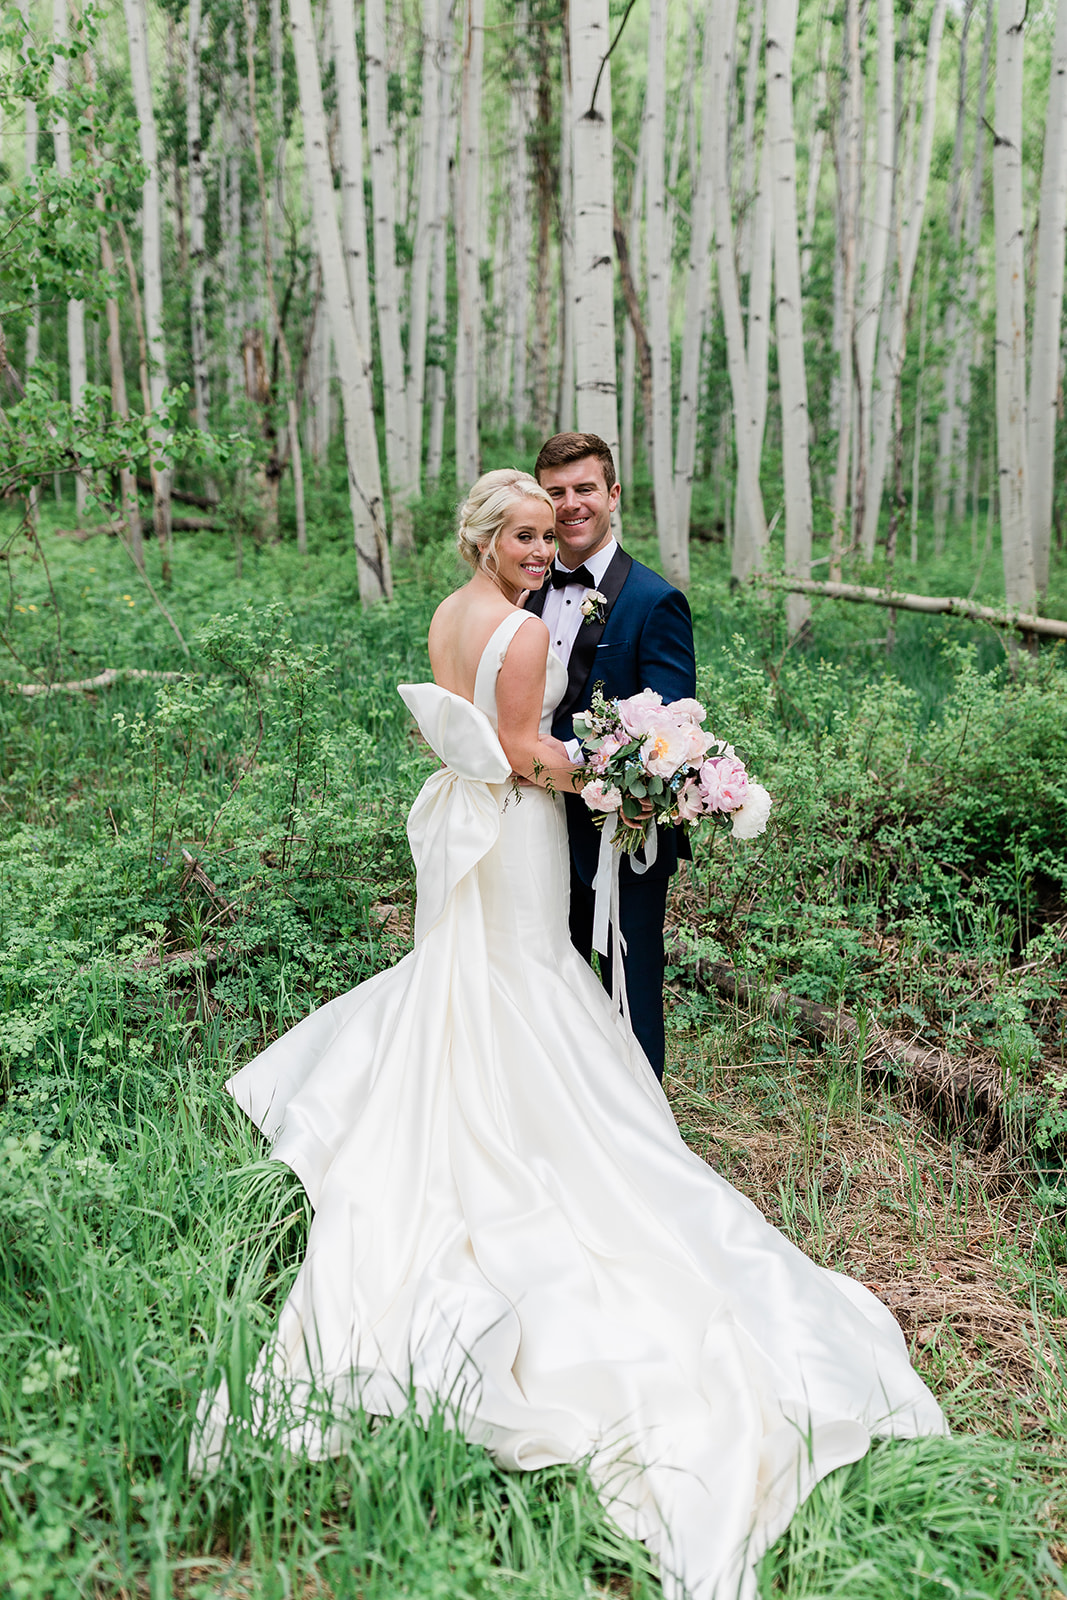 Vail bride and groom pose in strand of green aspen trees